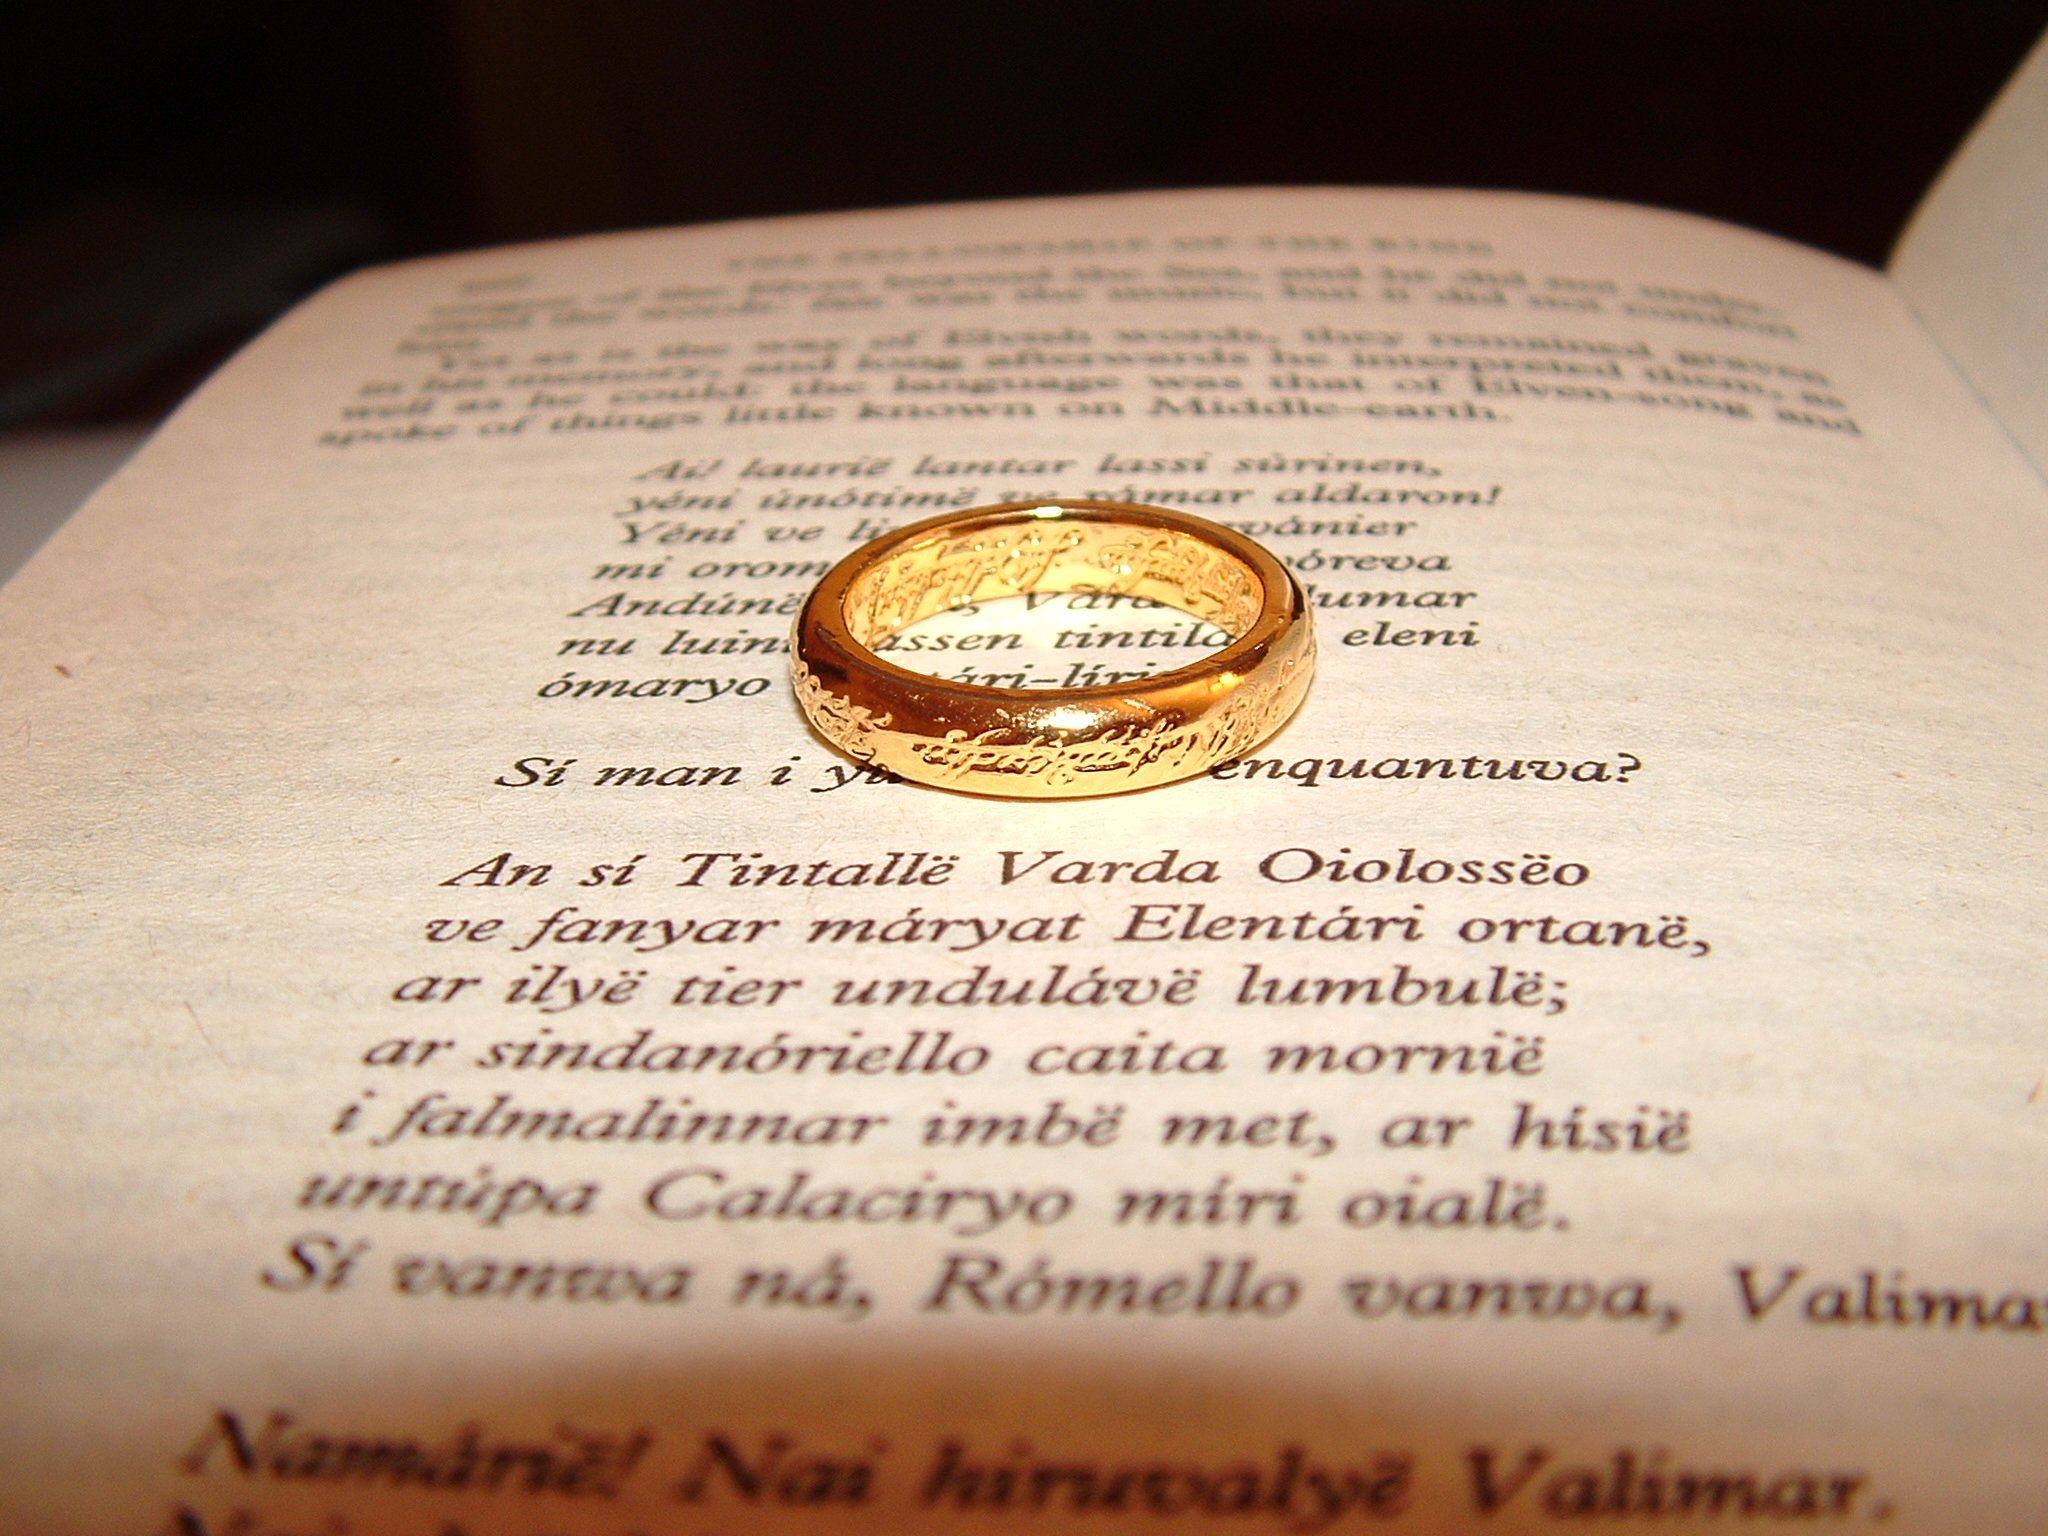 a page of the book "The Lord of the Rings"